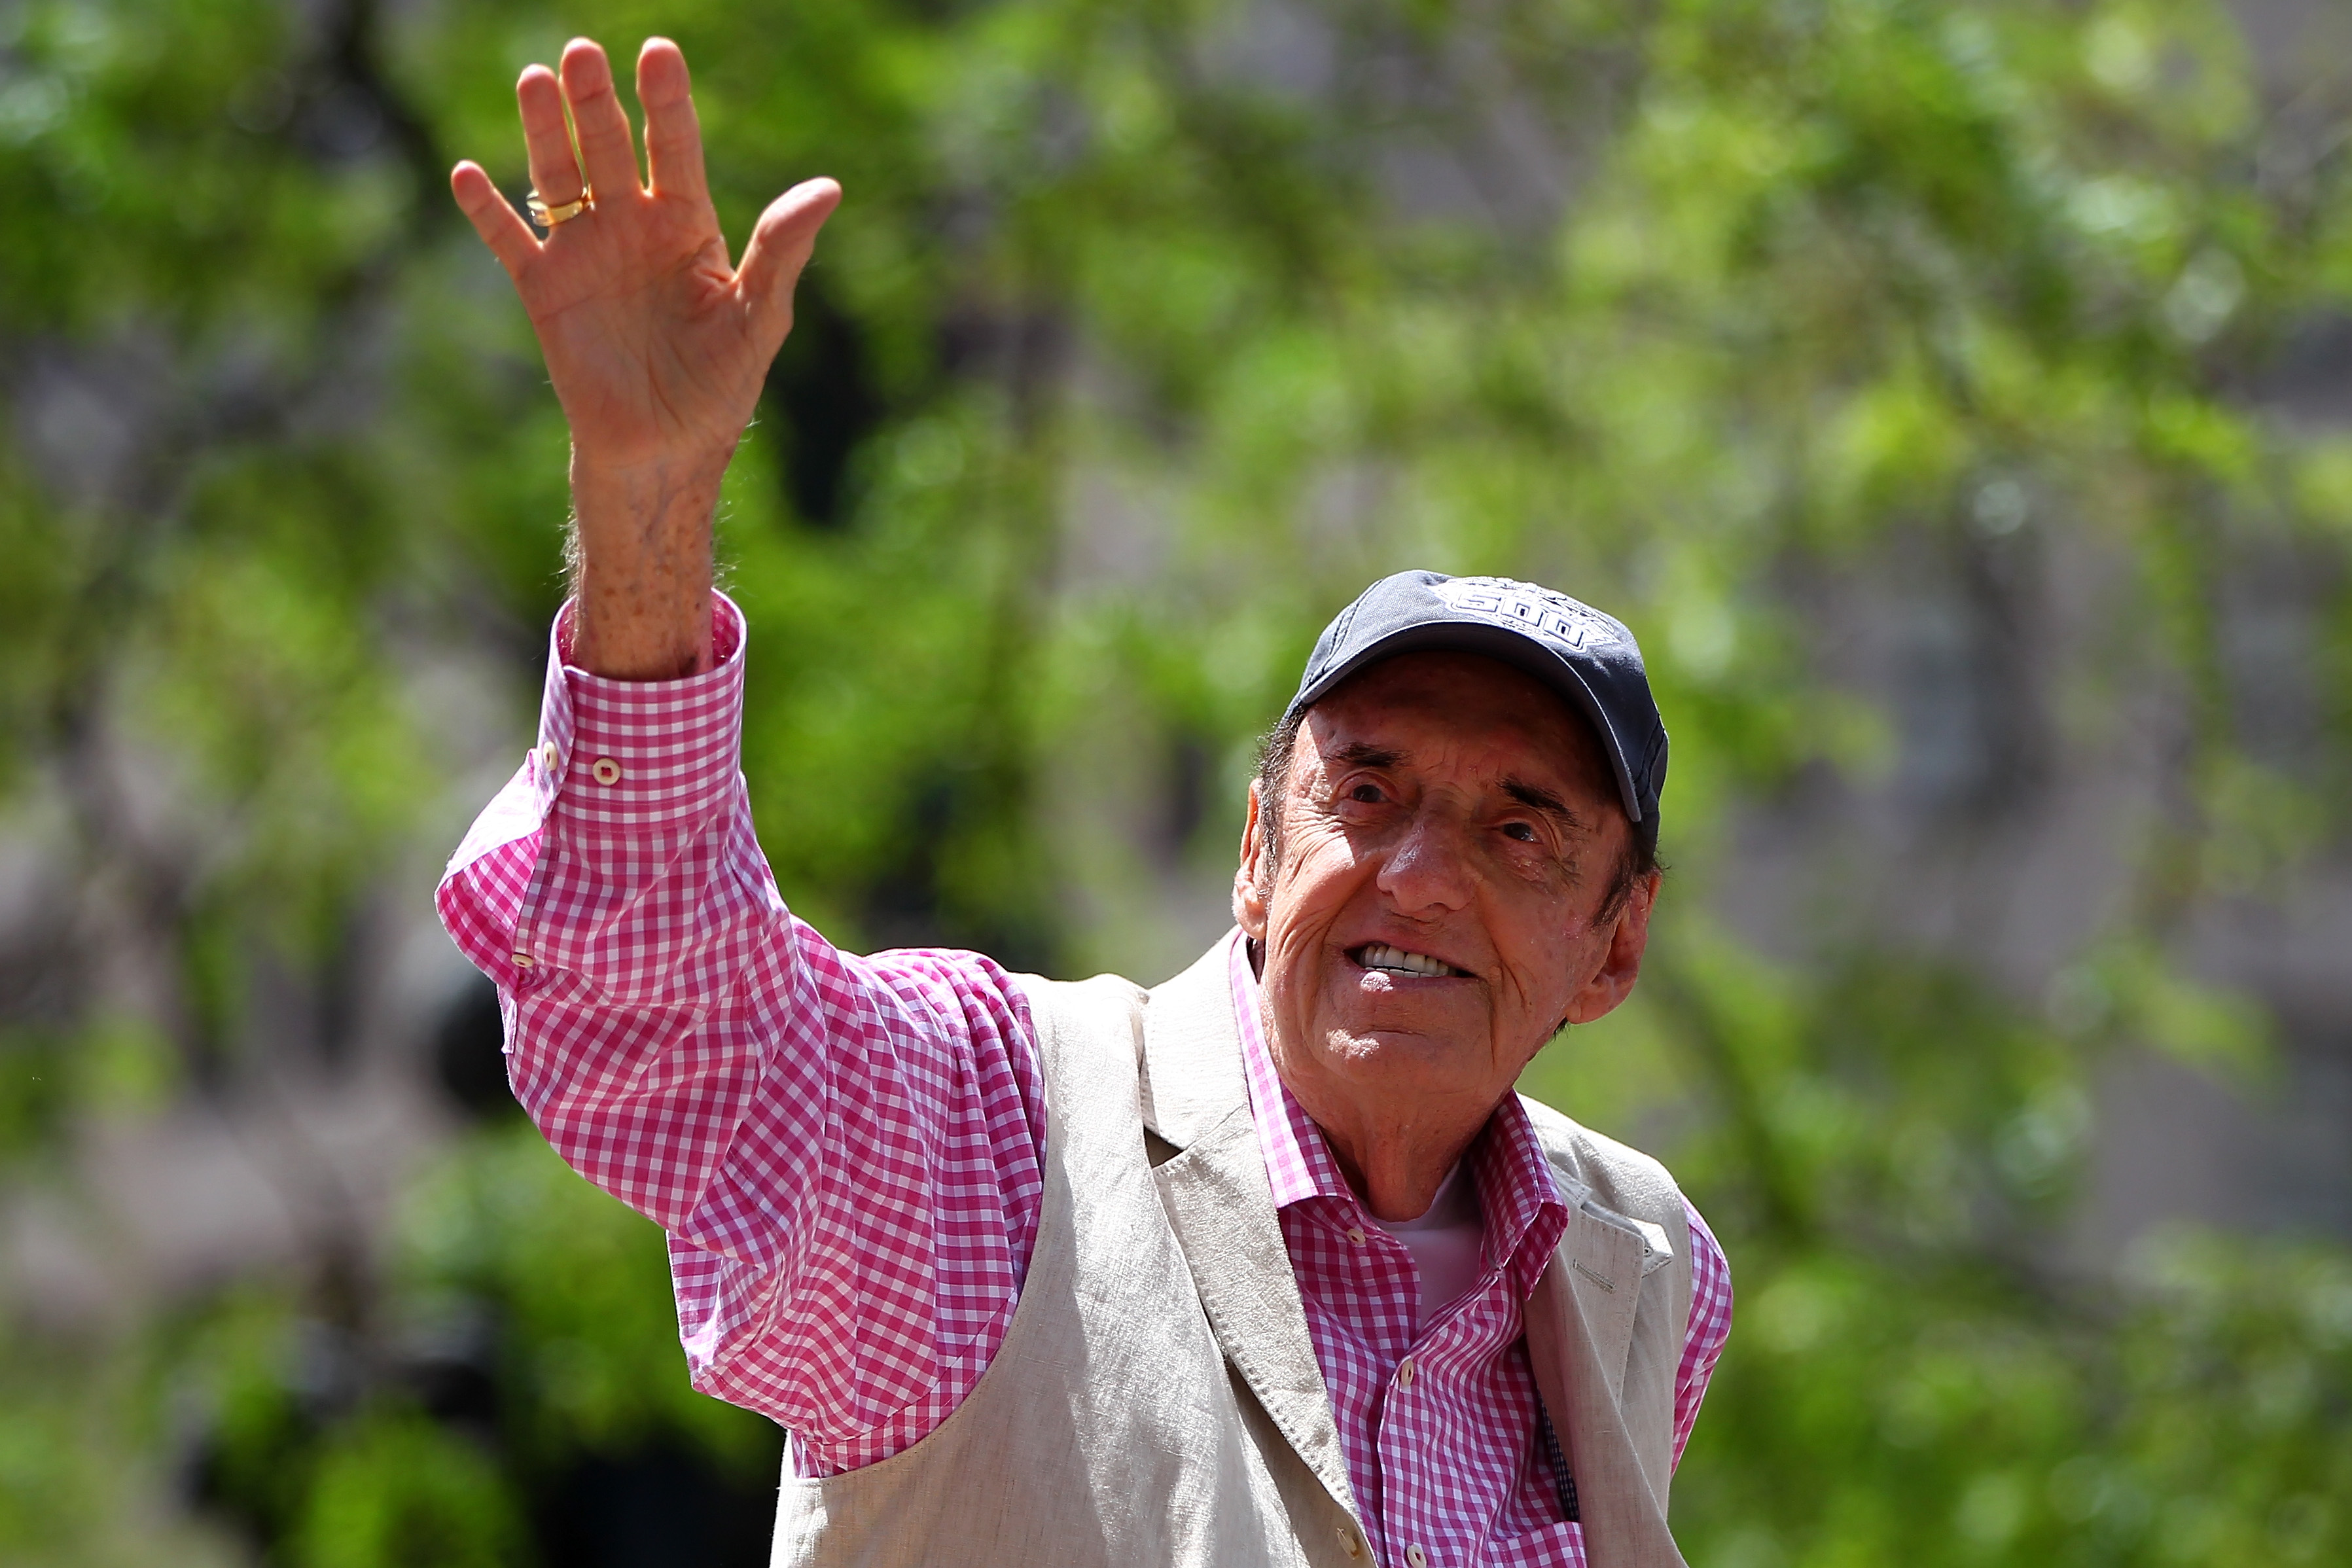 Jim Nabors waves to the crowd during the Indianapolis 500 parade on May 24, 2014, in Indianapolis, Indiana. | Source: Getty Images